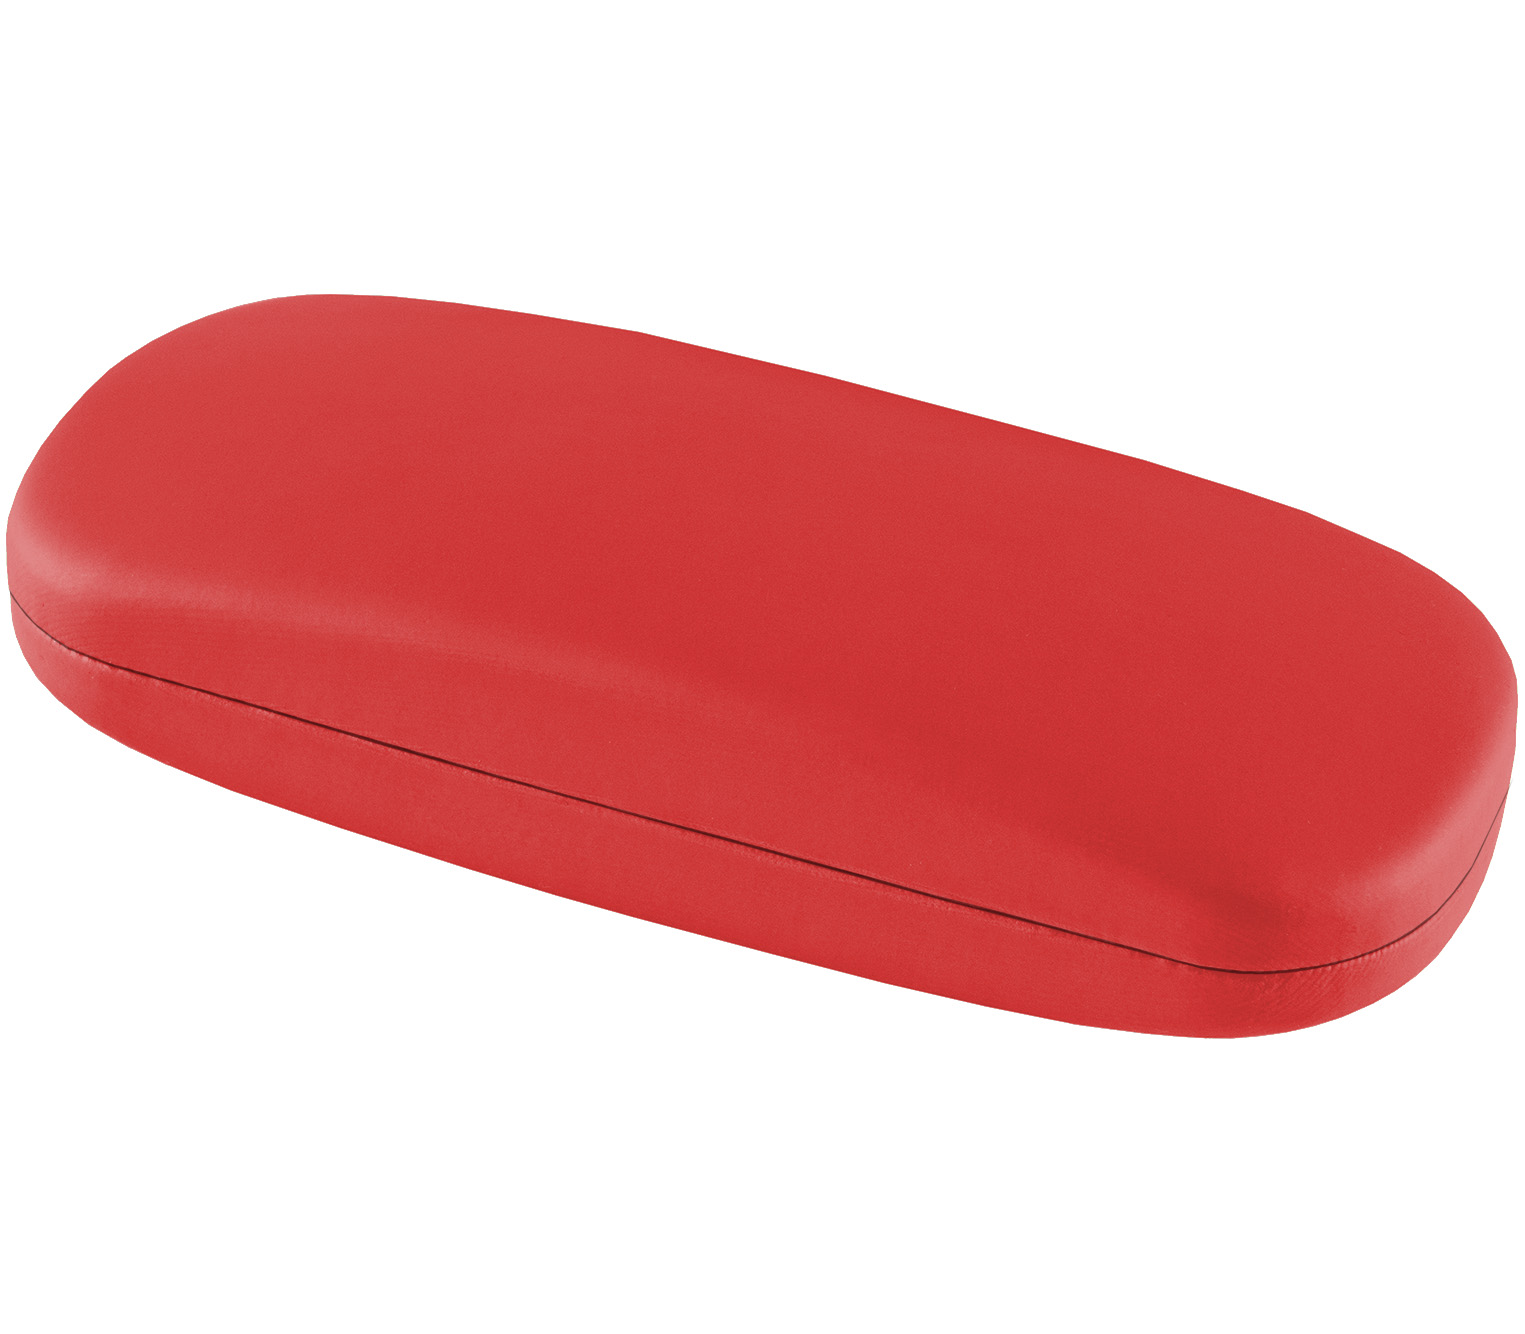 Main Image (Angle) - Pronto (Red) Glasses Cases Accessories